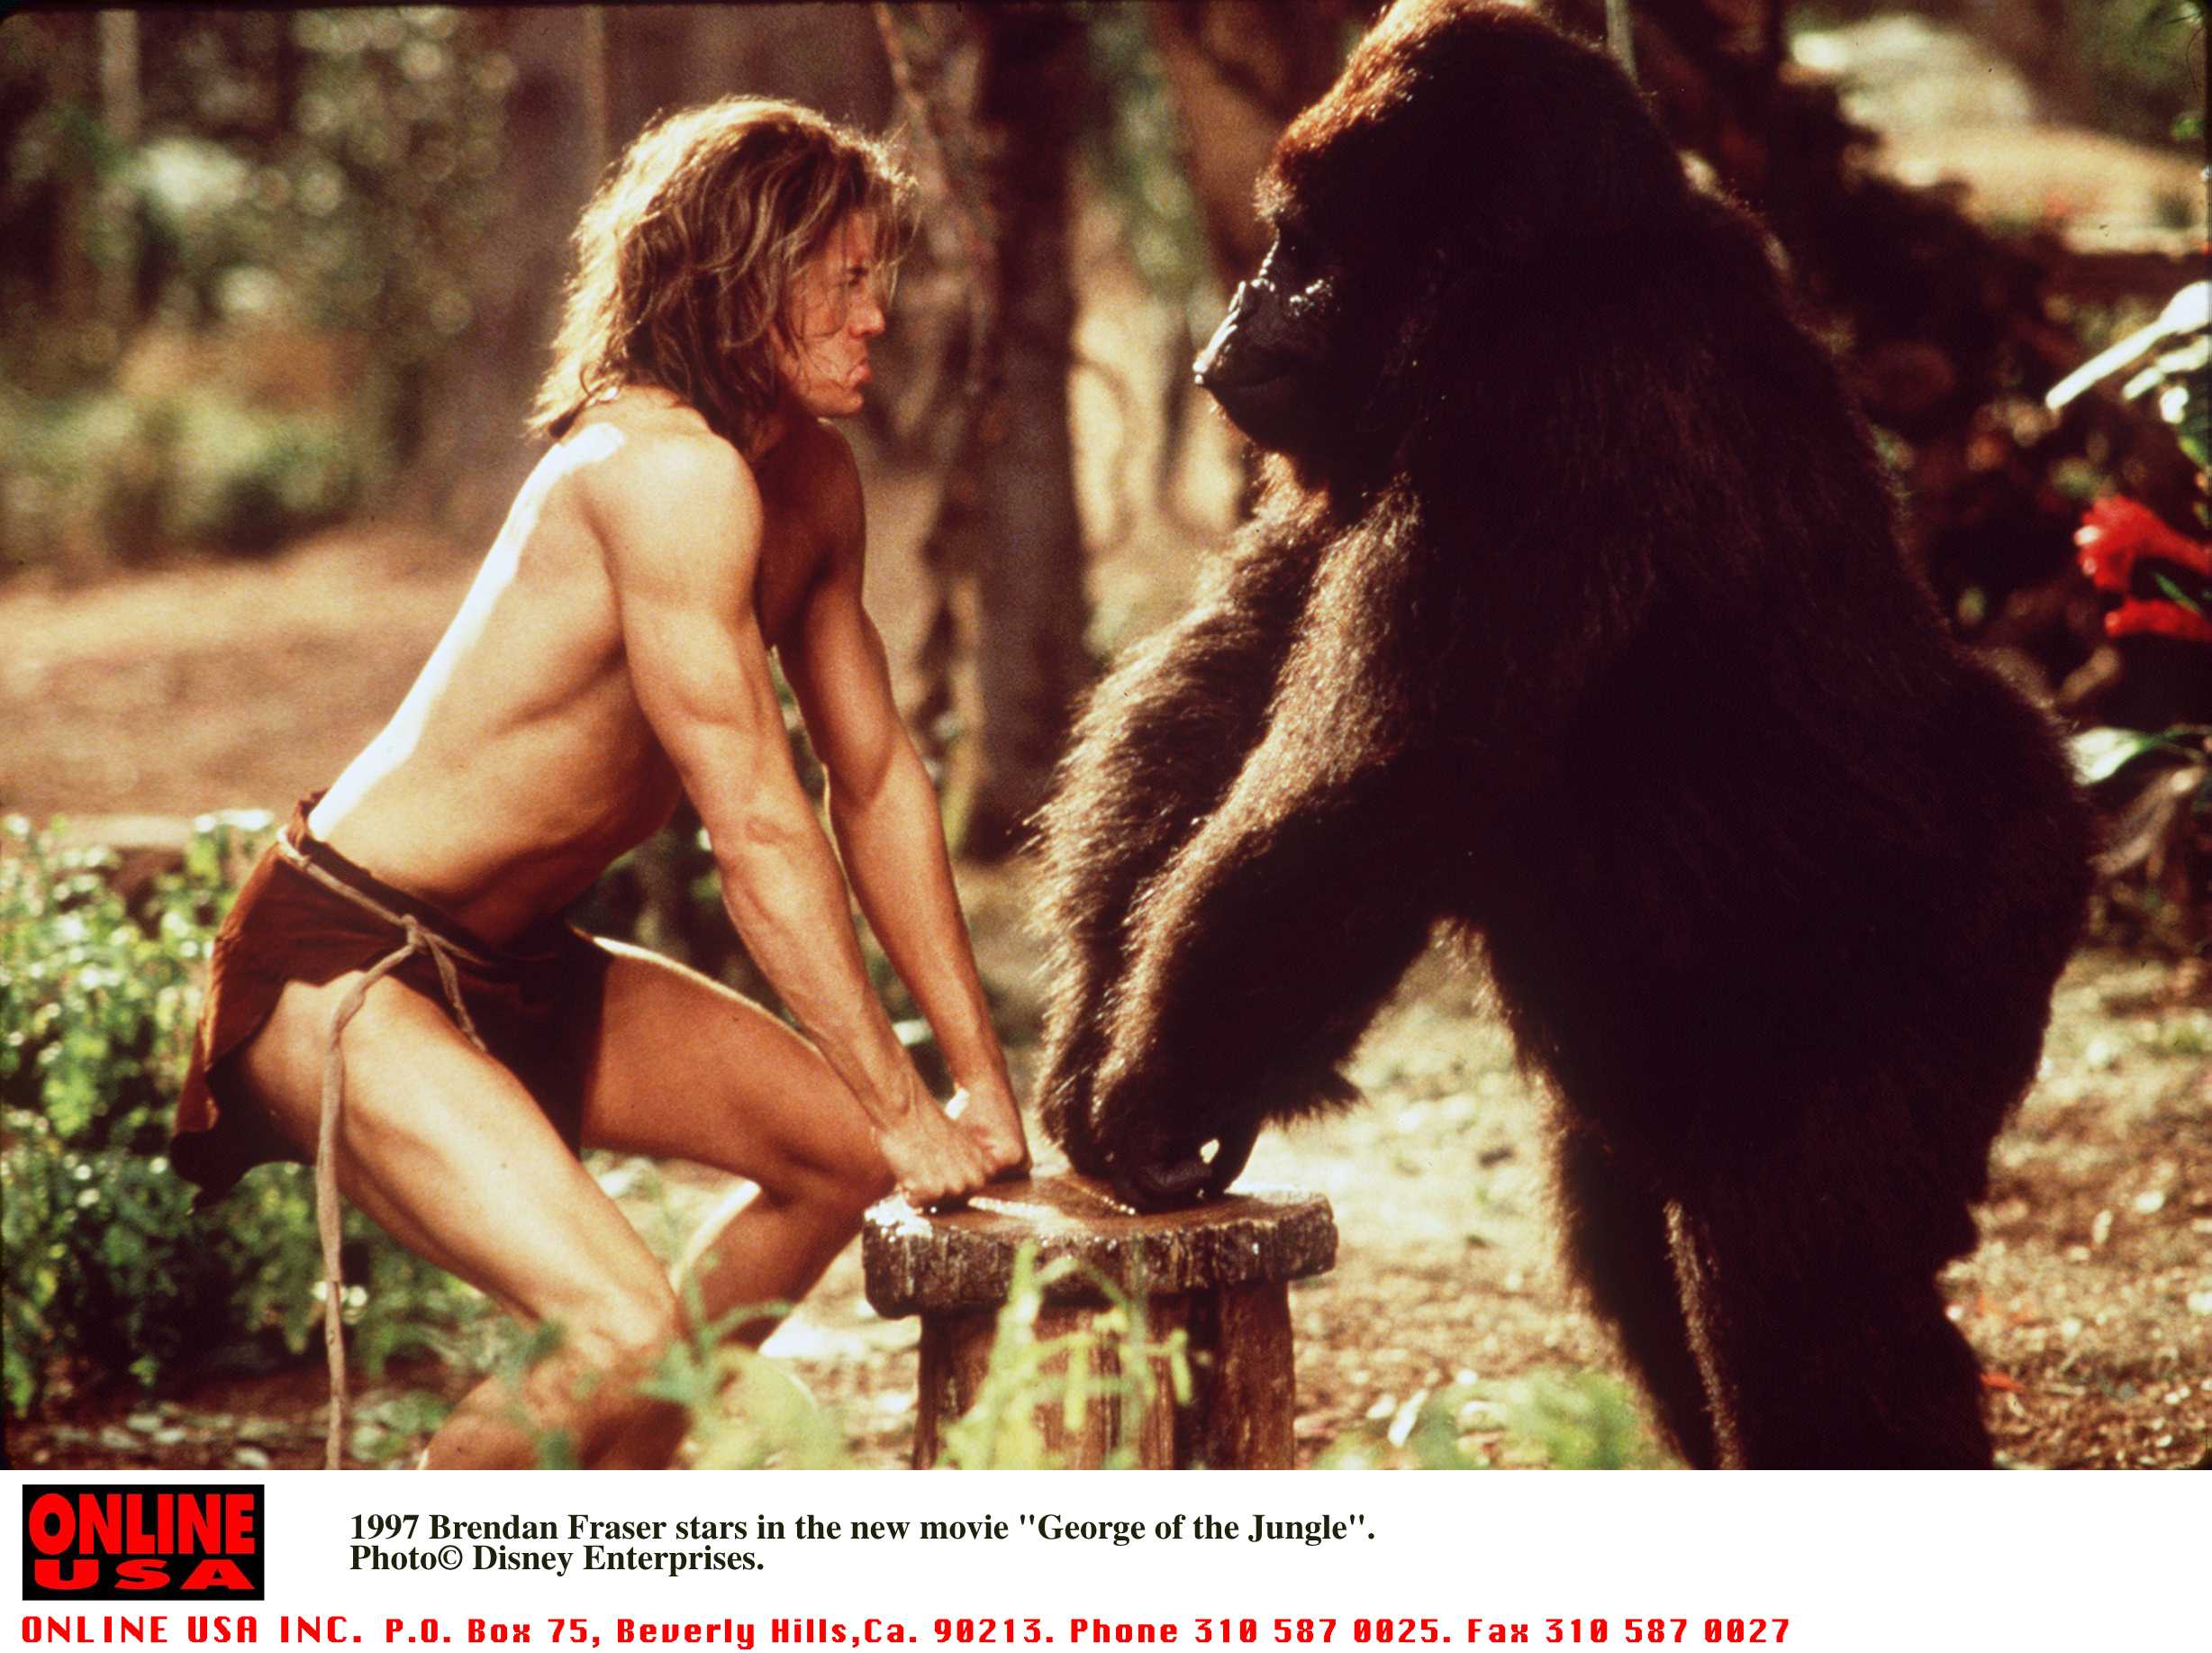 Brendan Fraser starring in the movie "George of the Jungle" on June 20, 1997. | Source: Getty Images